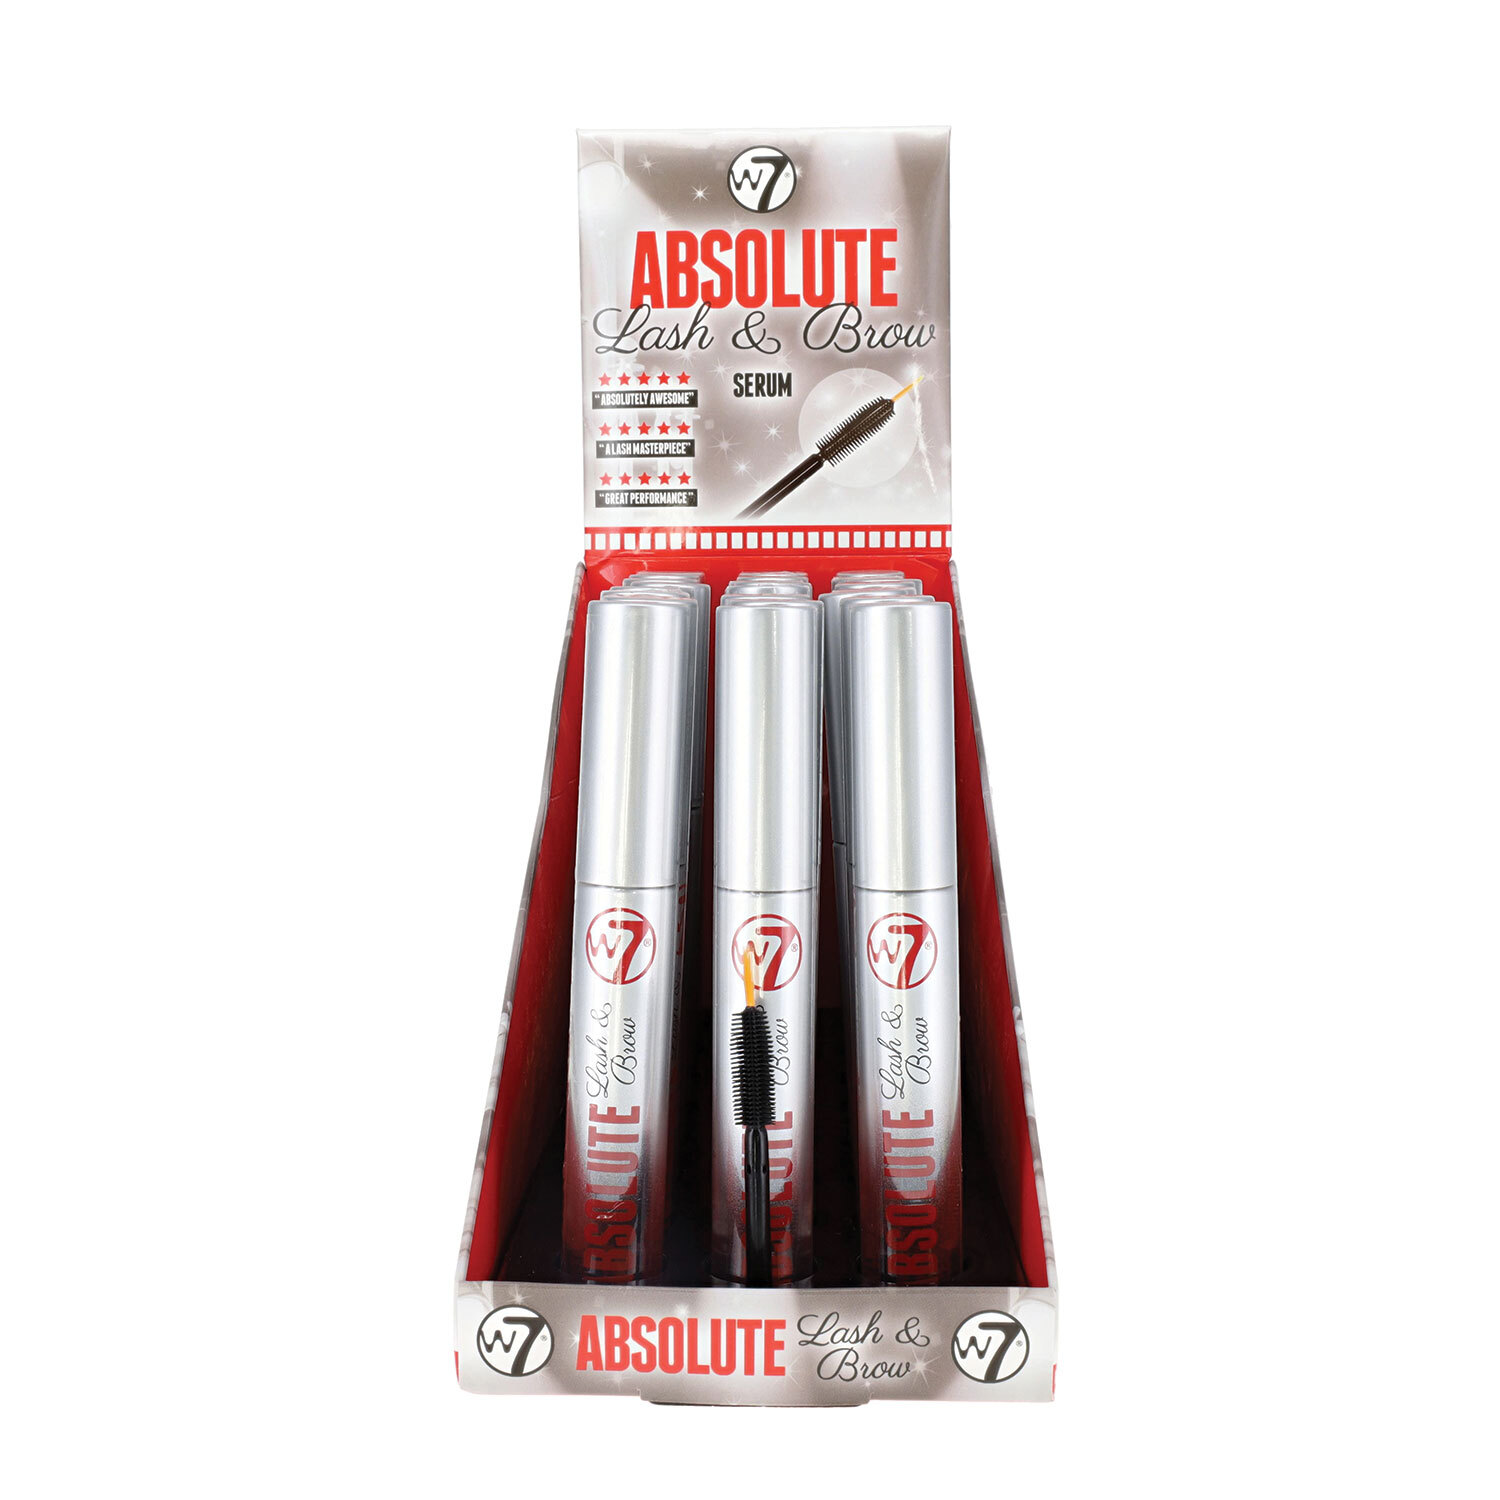 W7 Absolute Lash and Brow Serum Image